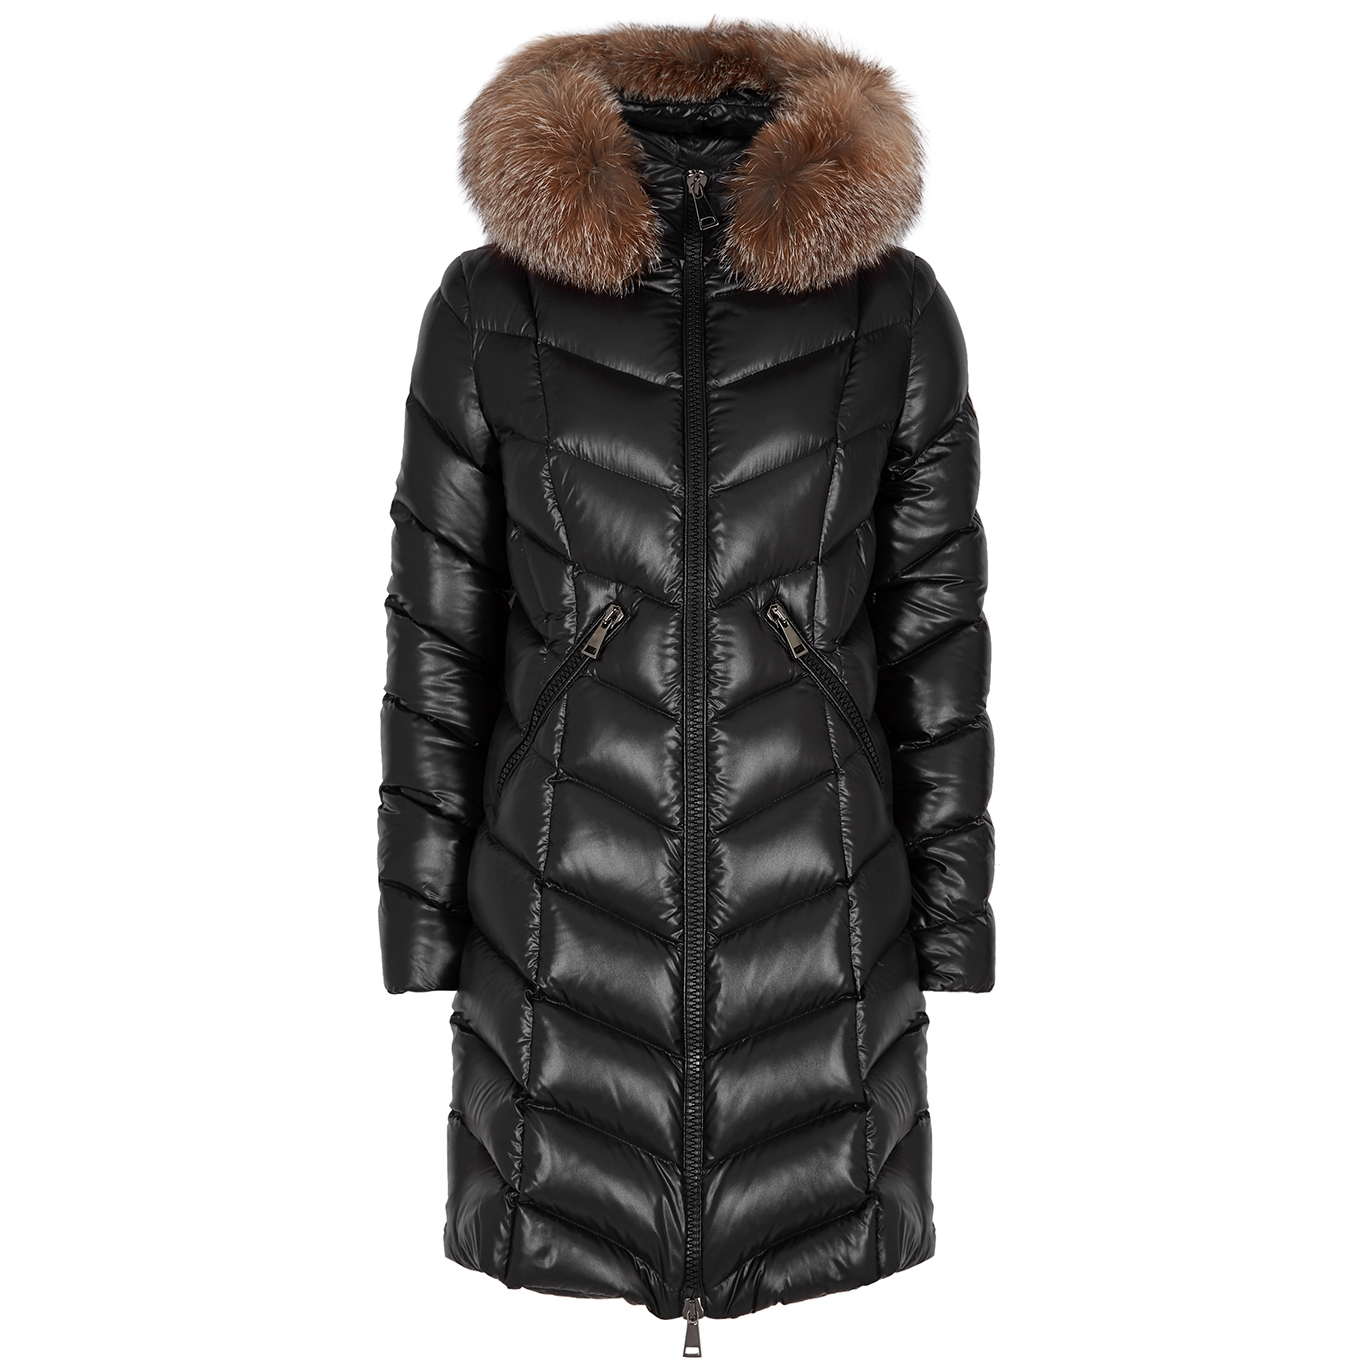 Fulmarus Black Fur-trimmed Quilted Shell Jacket